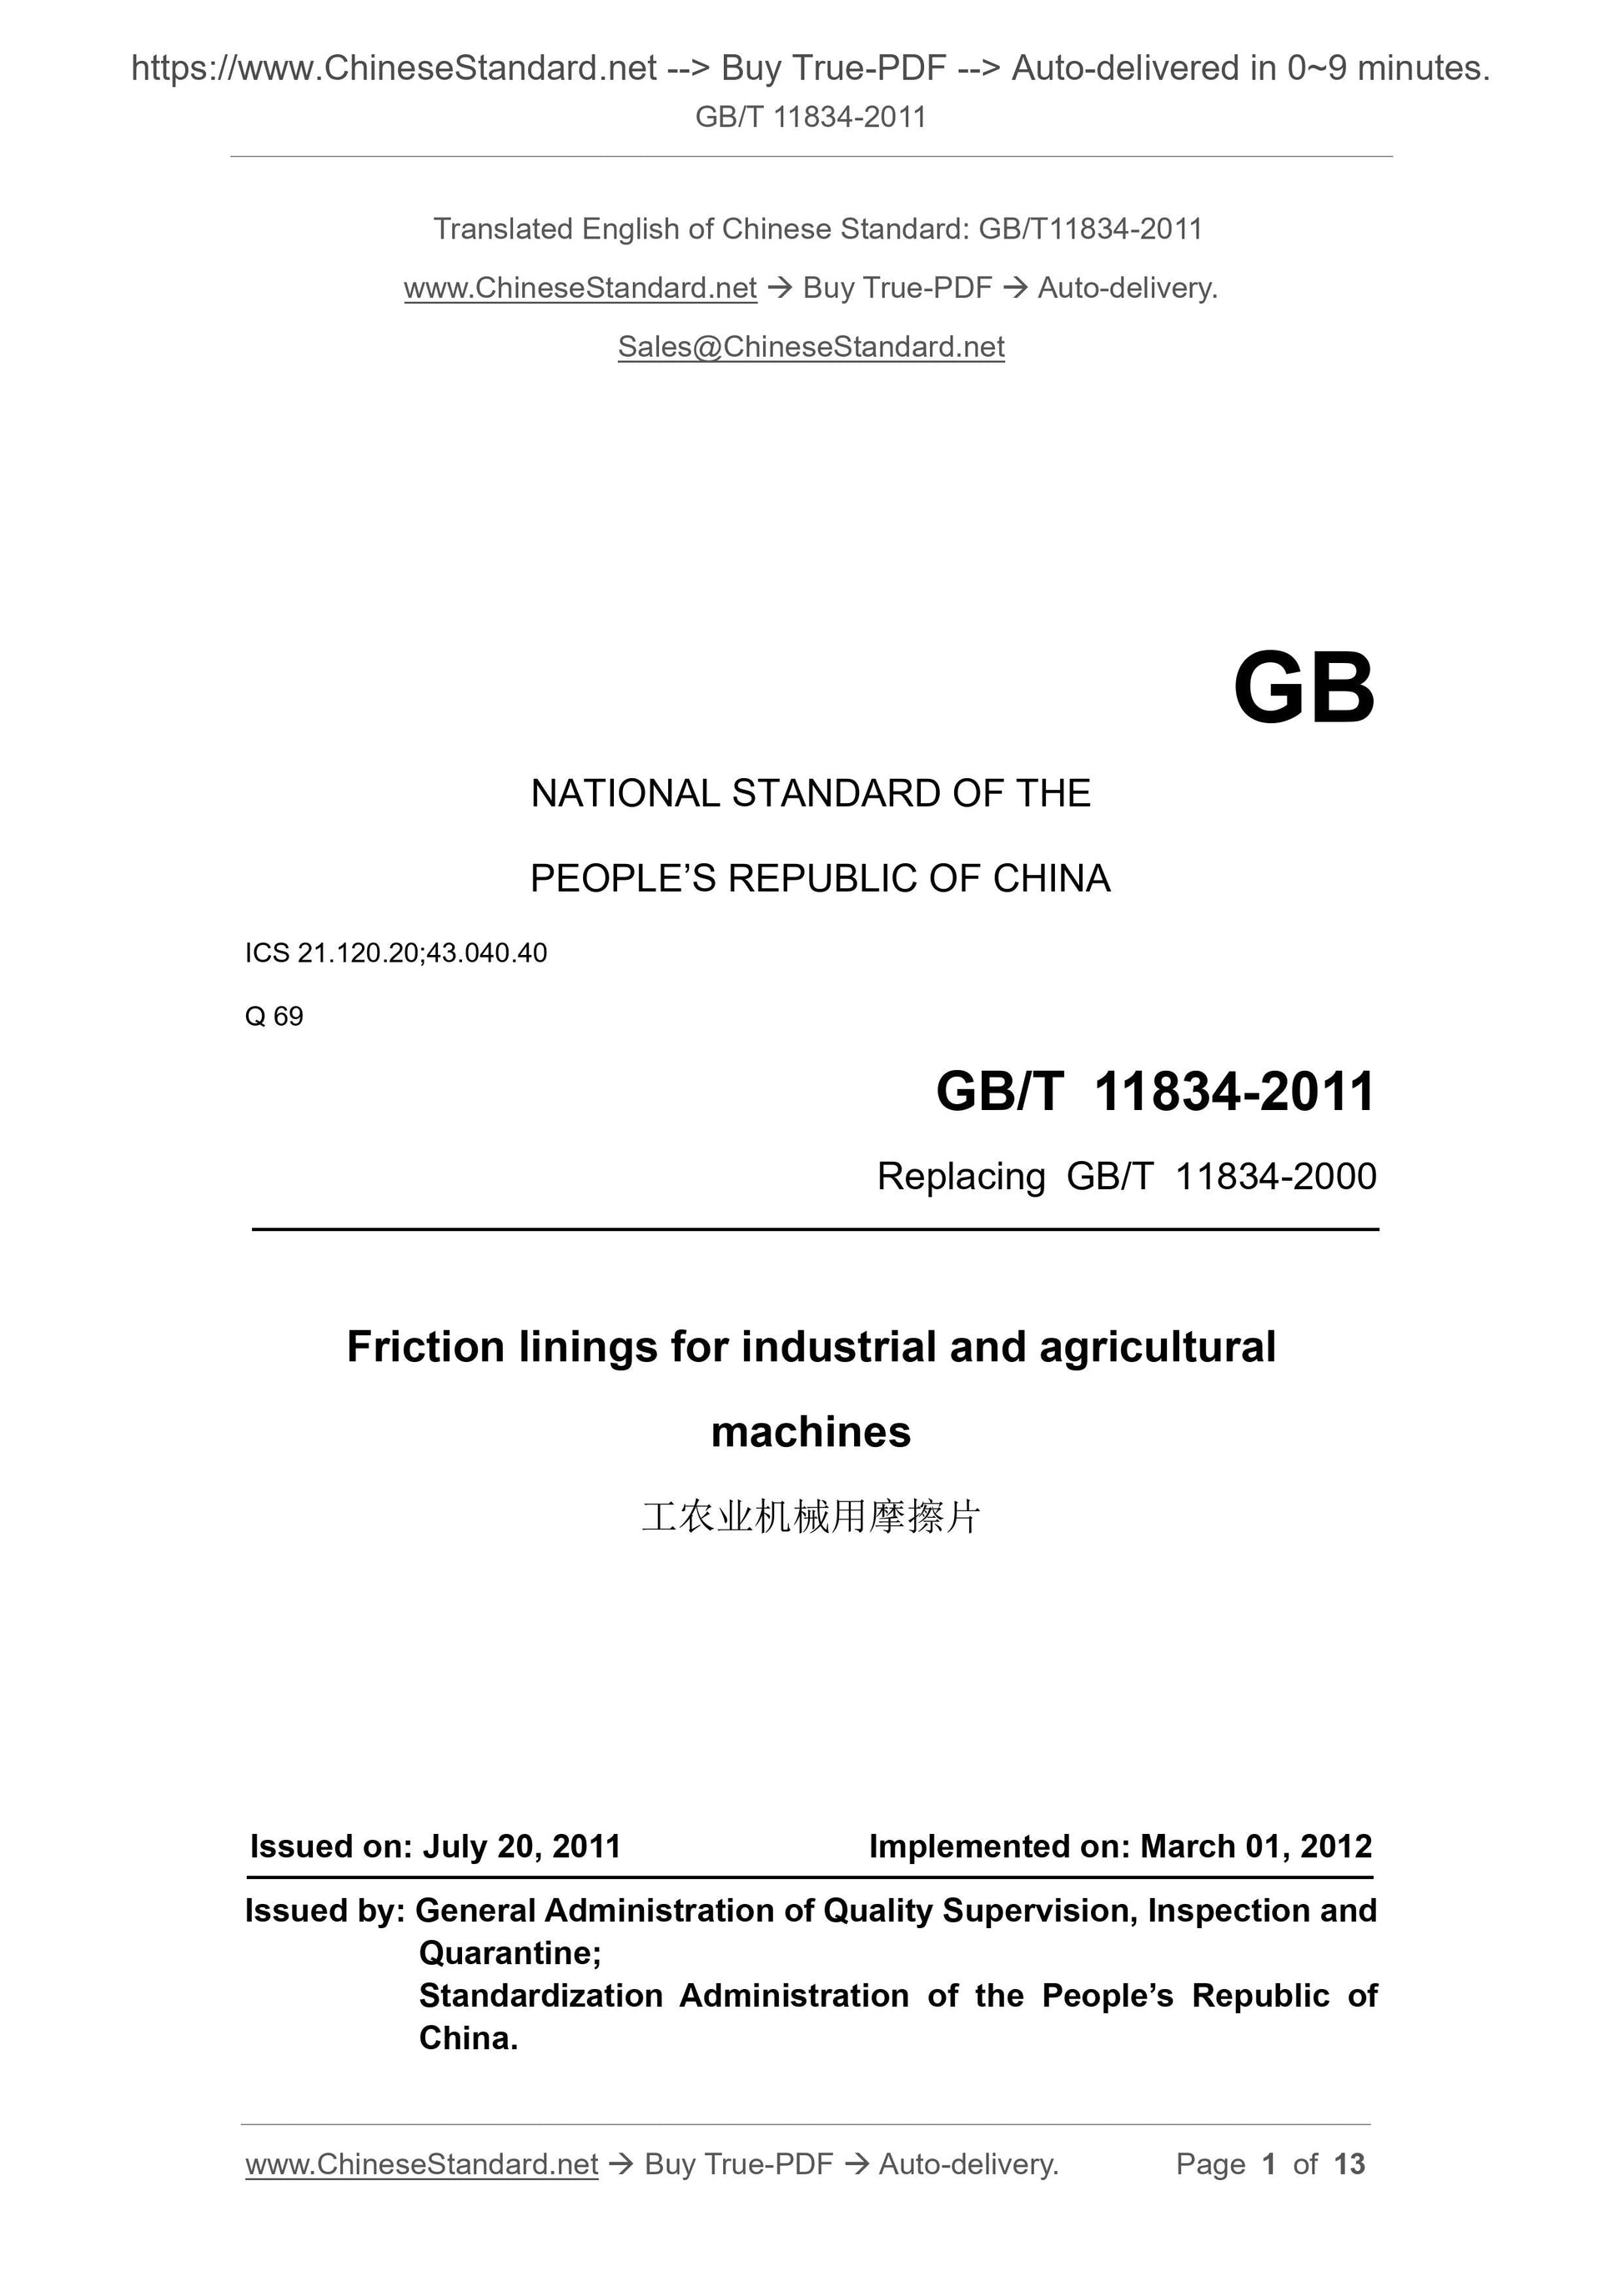 GB/T 11834-2011 Page 1